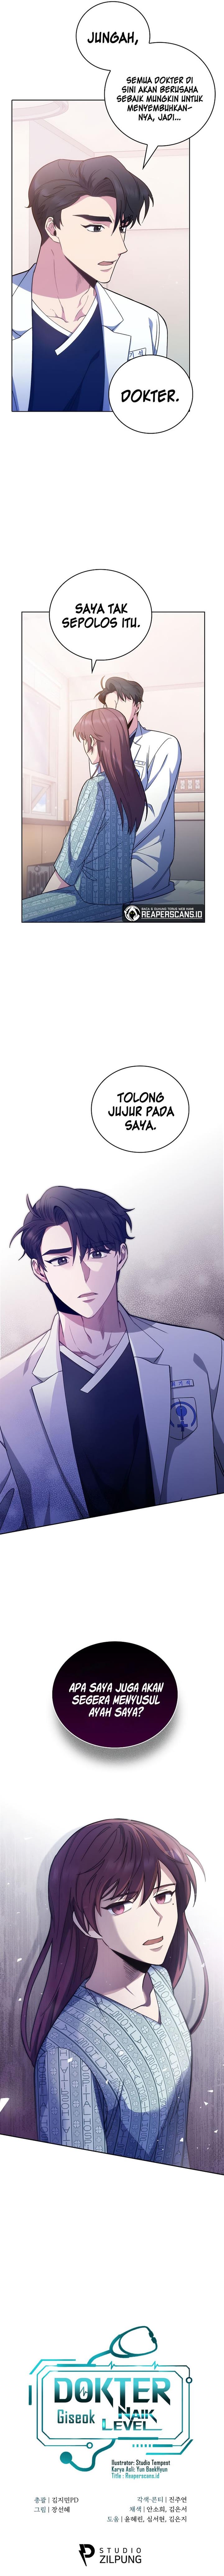 Level-Up Doctor Chapter 40